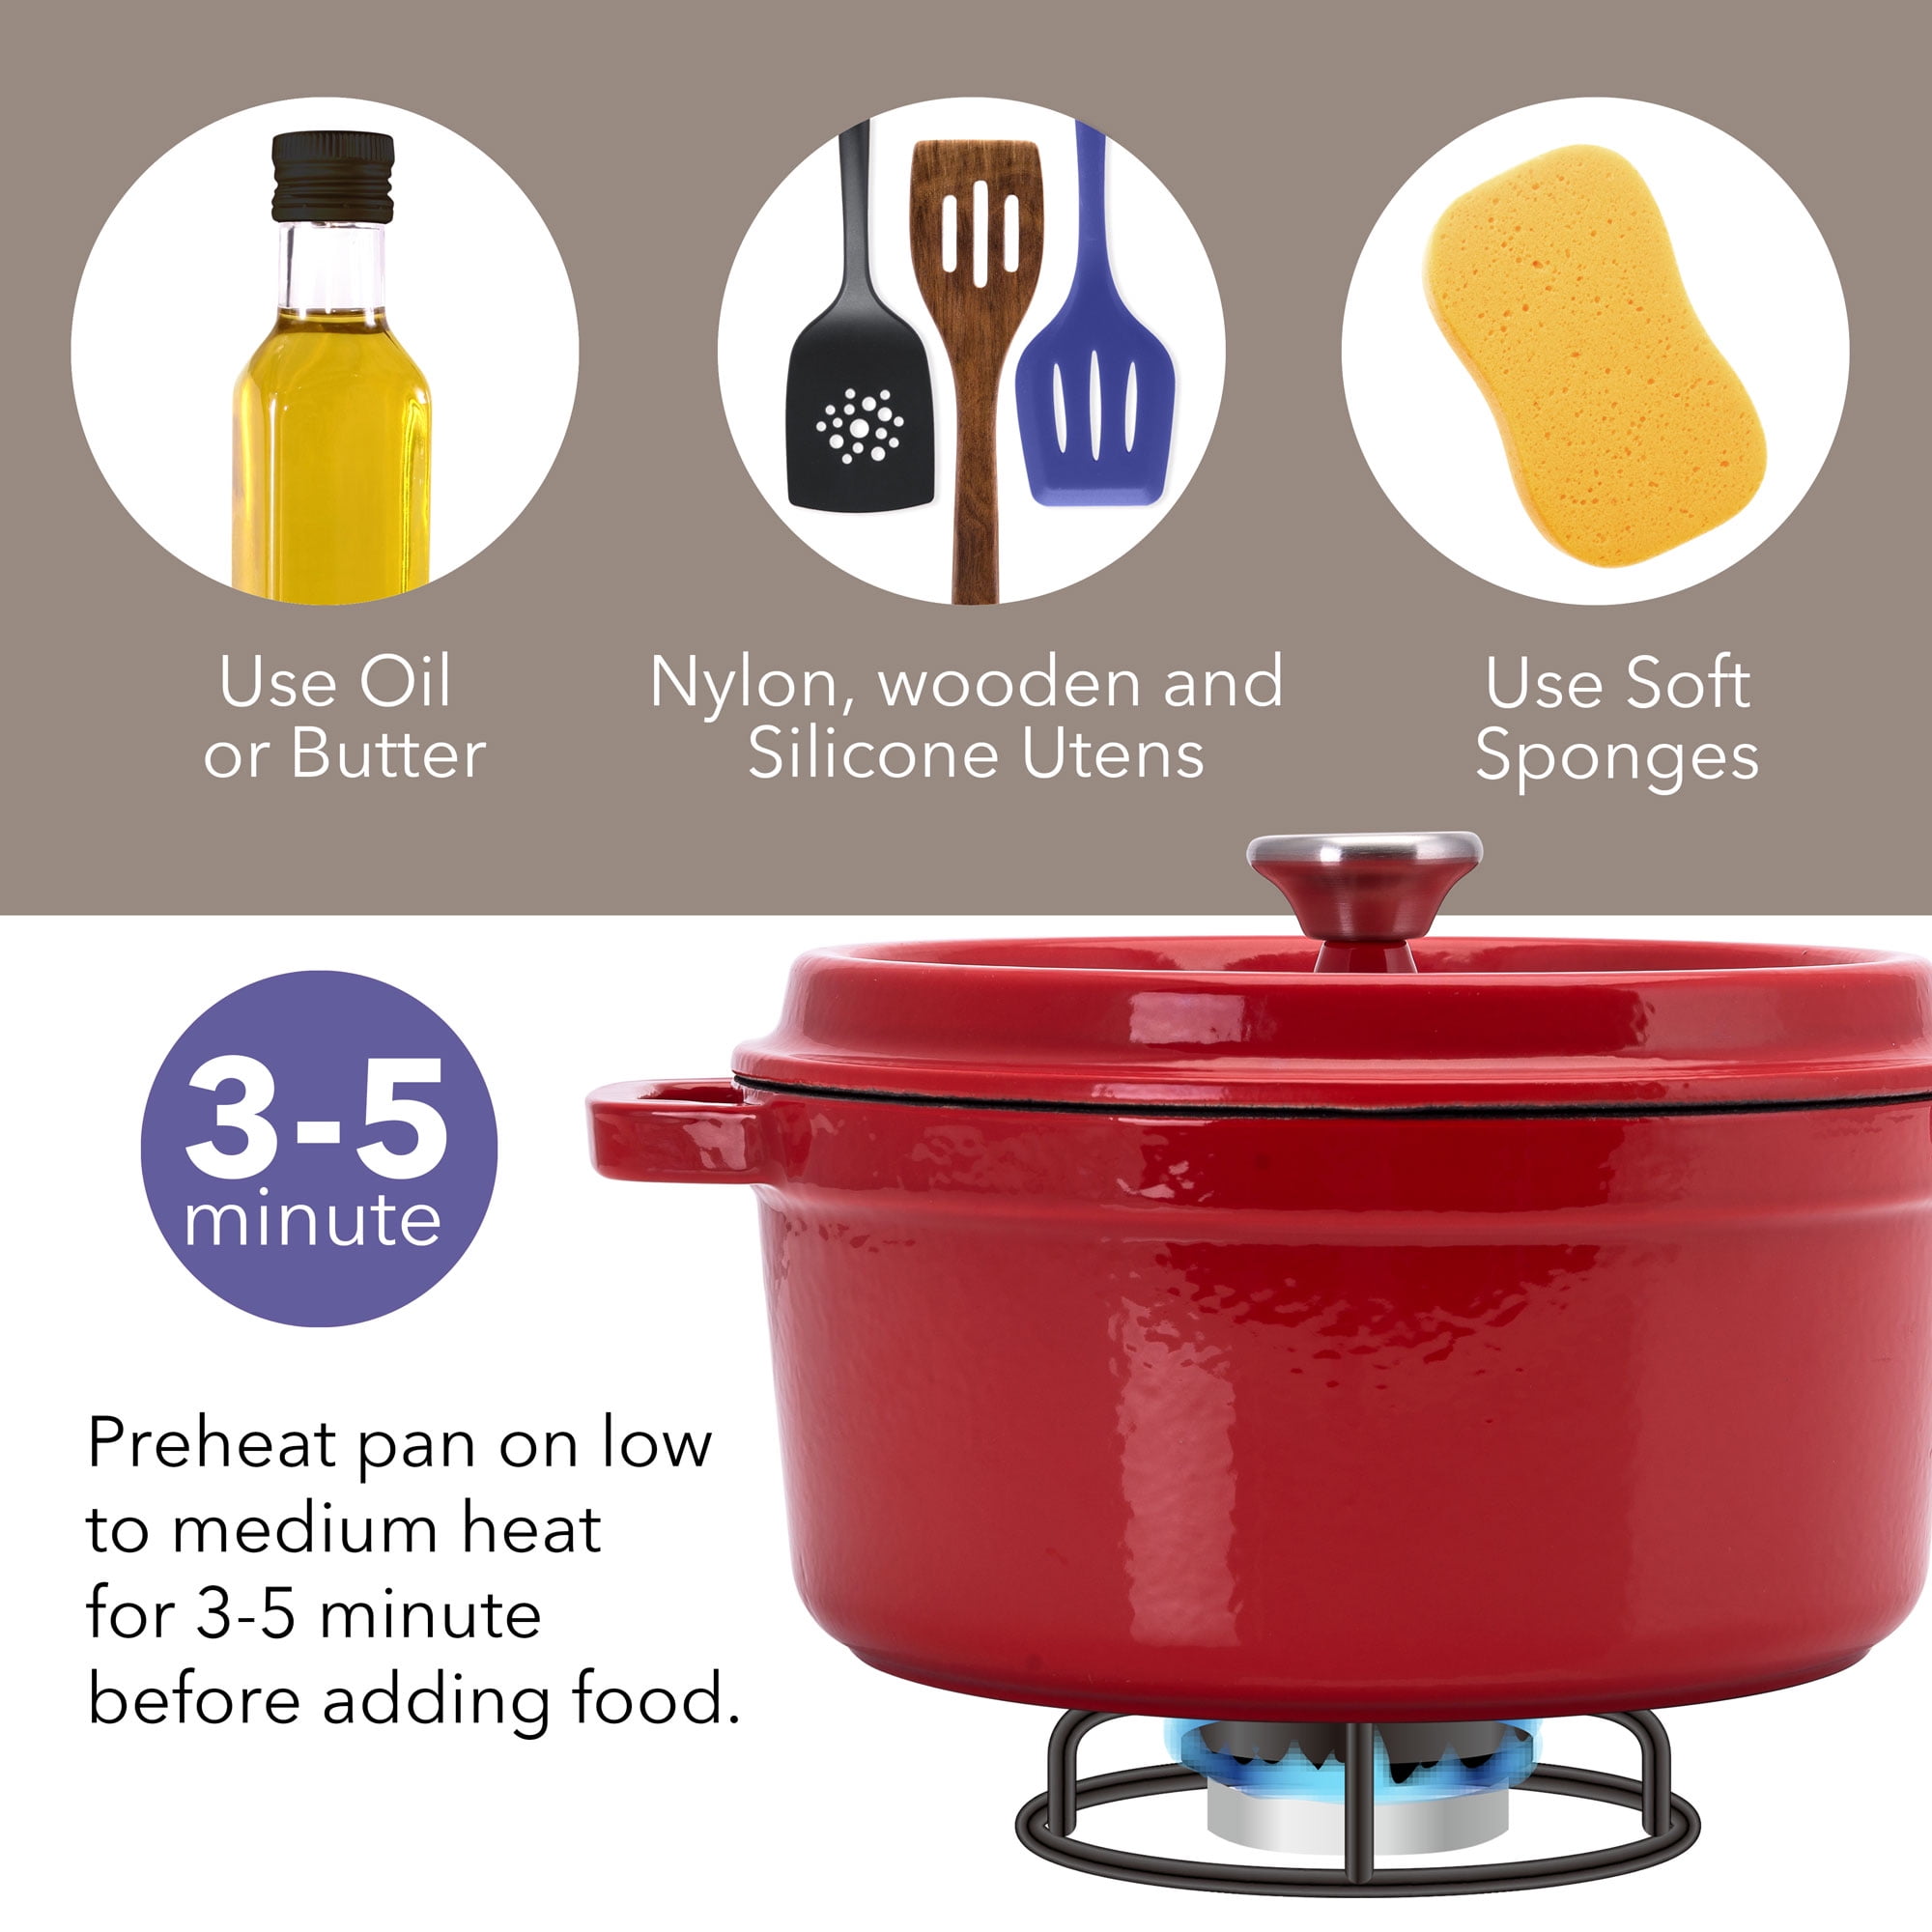 Enamel Coated Dutch Oven with Lid, Red, 9 quart – Richard's